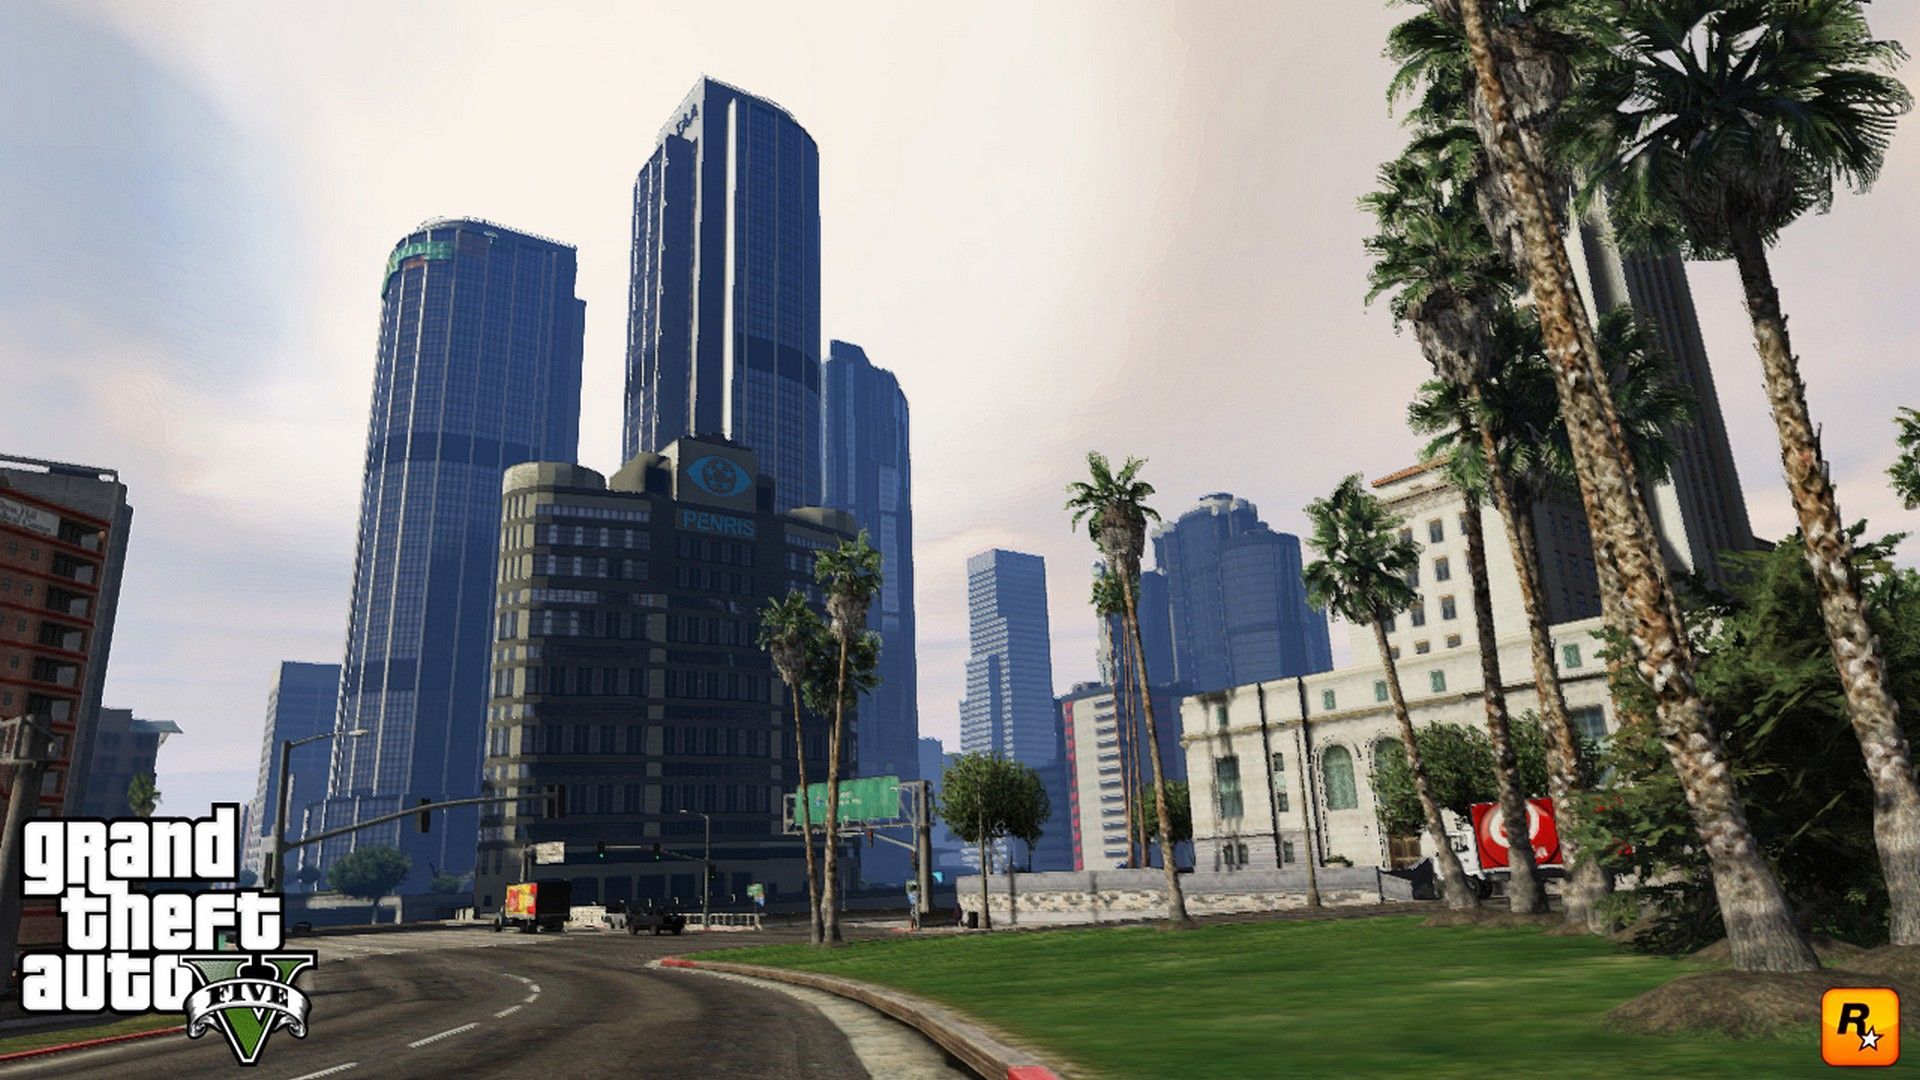 Grand Theft Auto 5 City View Wallpapers